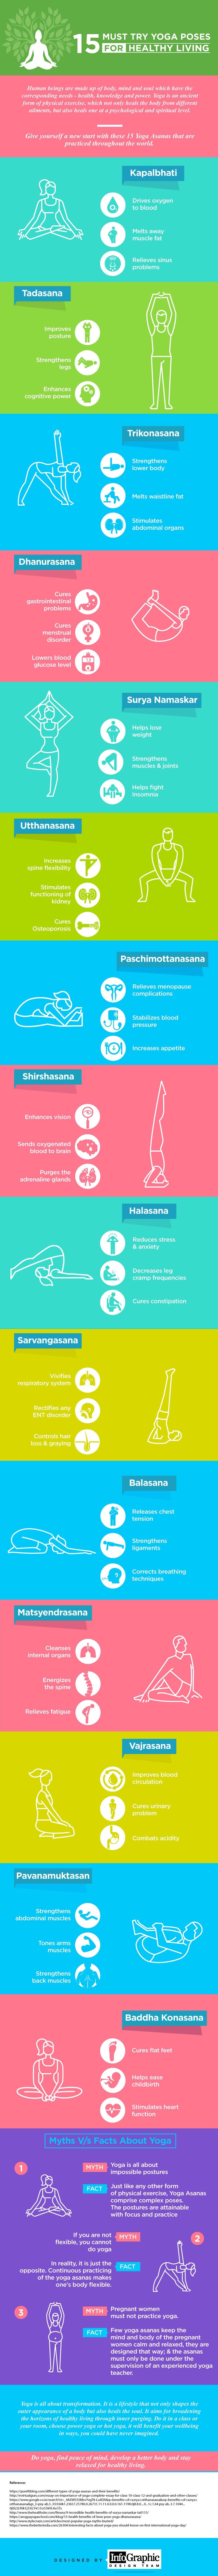 15 Must Try Yoga Poses for Healthy Living #infographic